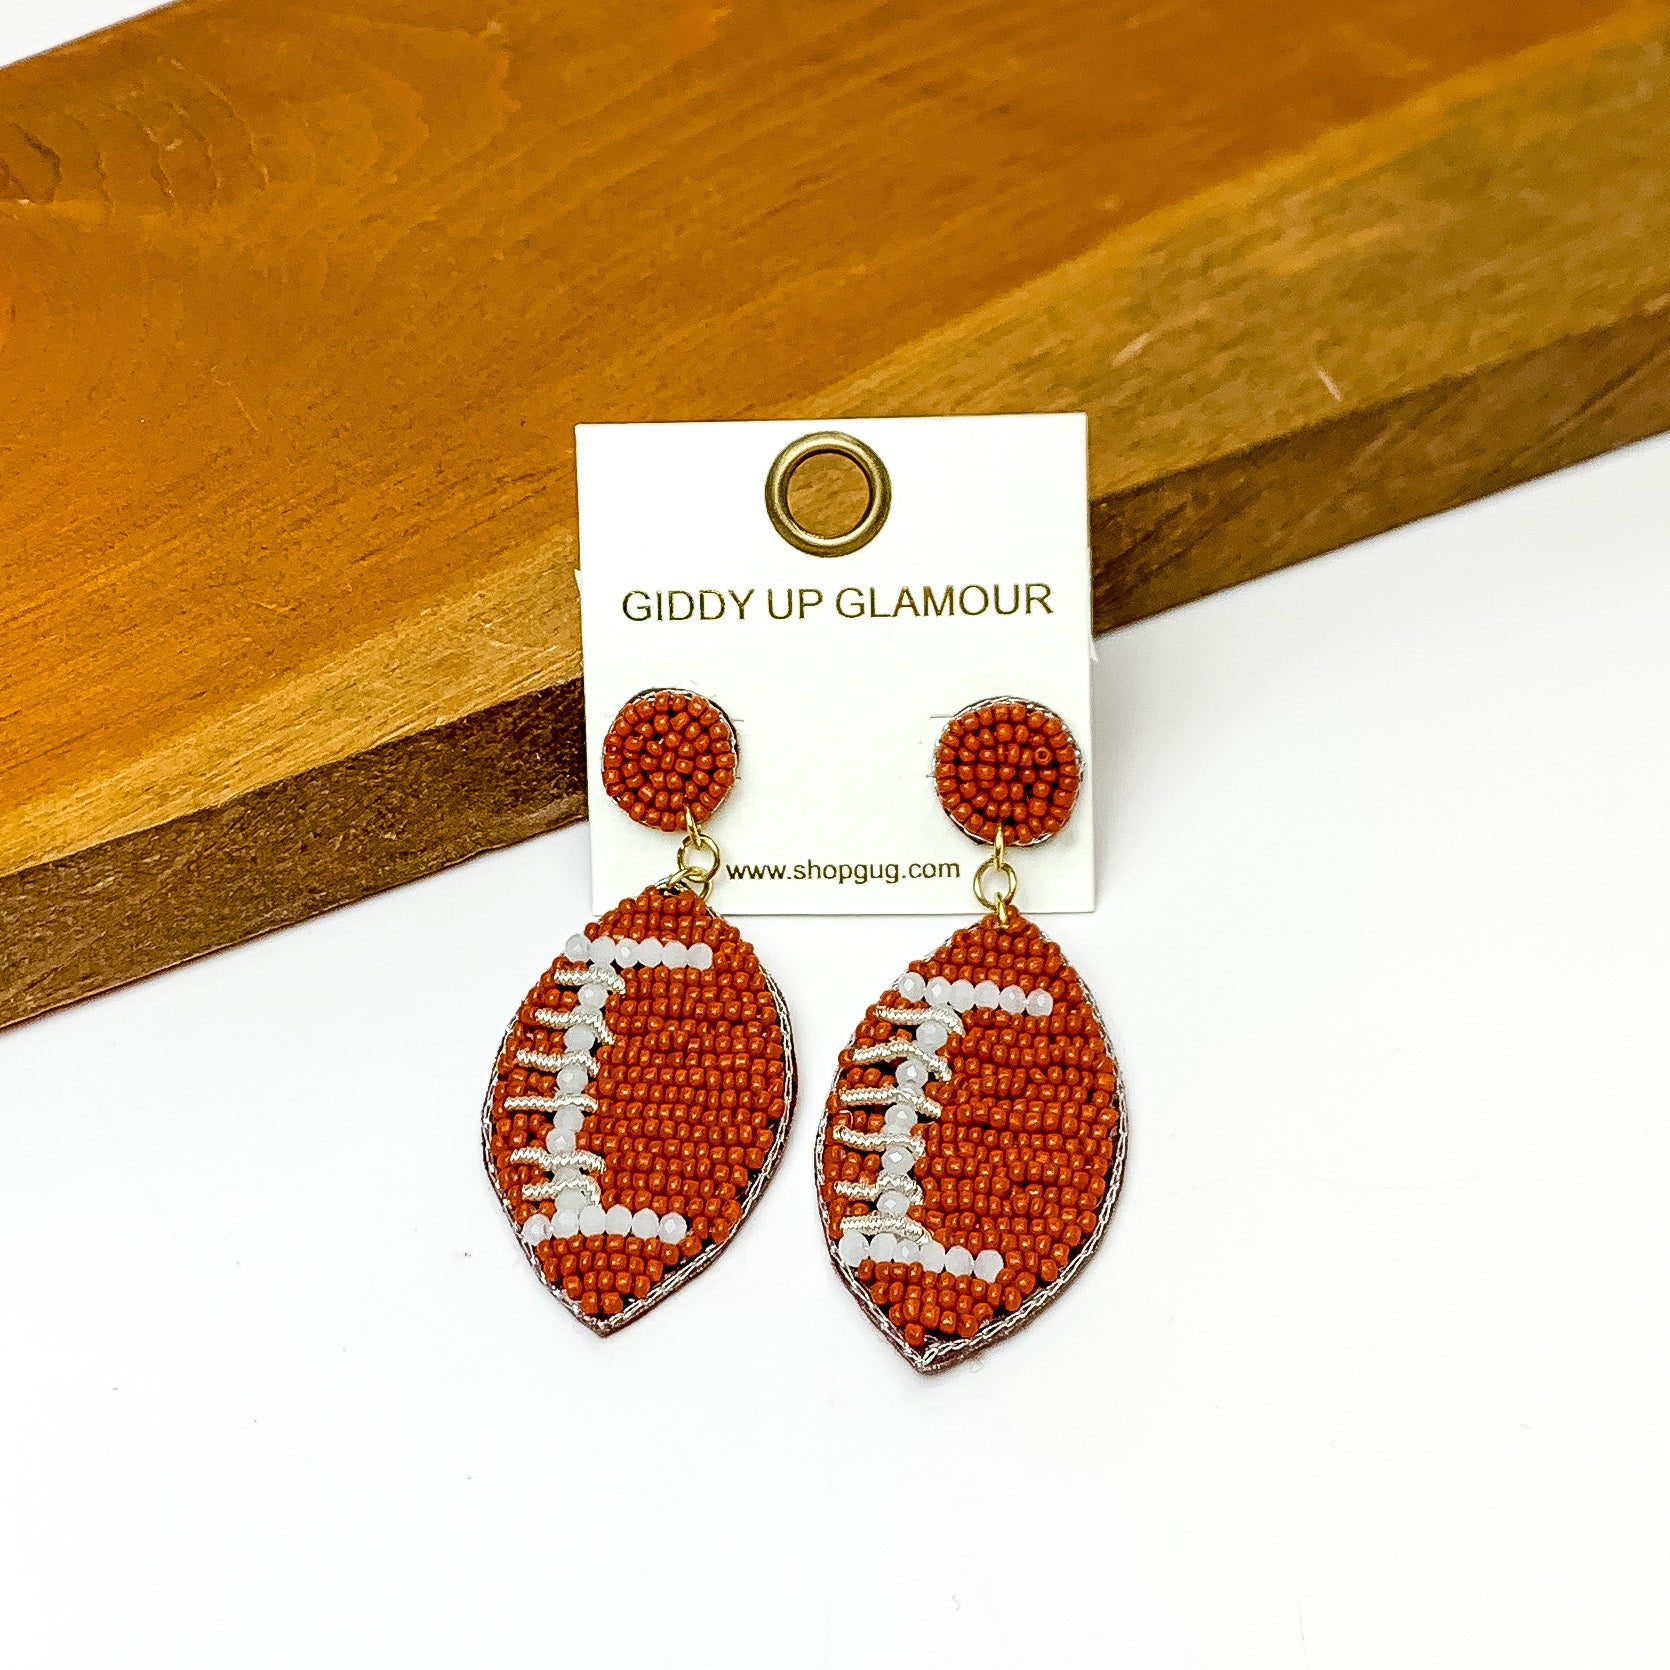 Football Post Beaded Earrings in Brown. Pictured on a white background with the earrings laying against a wood piece.